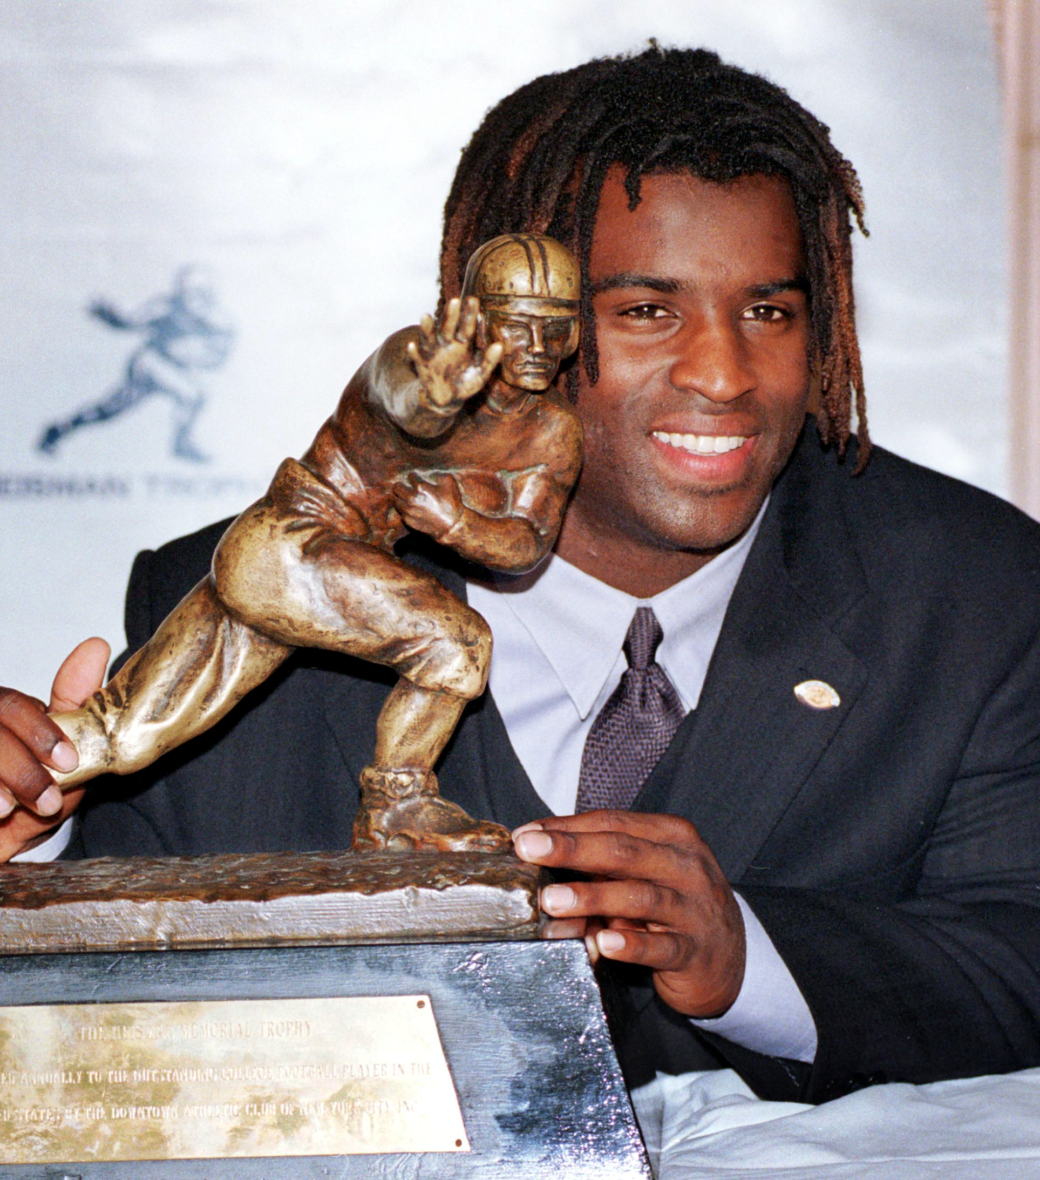 Ricky Williams (1998): In his senior year, Ricky Williams set 21 NCAA records and in 1998, rushed for 2,125 yards with 27 touchdowns. (Courtesy of University of Texas Athletics)